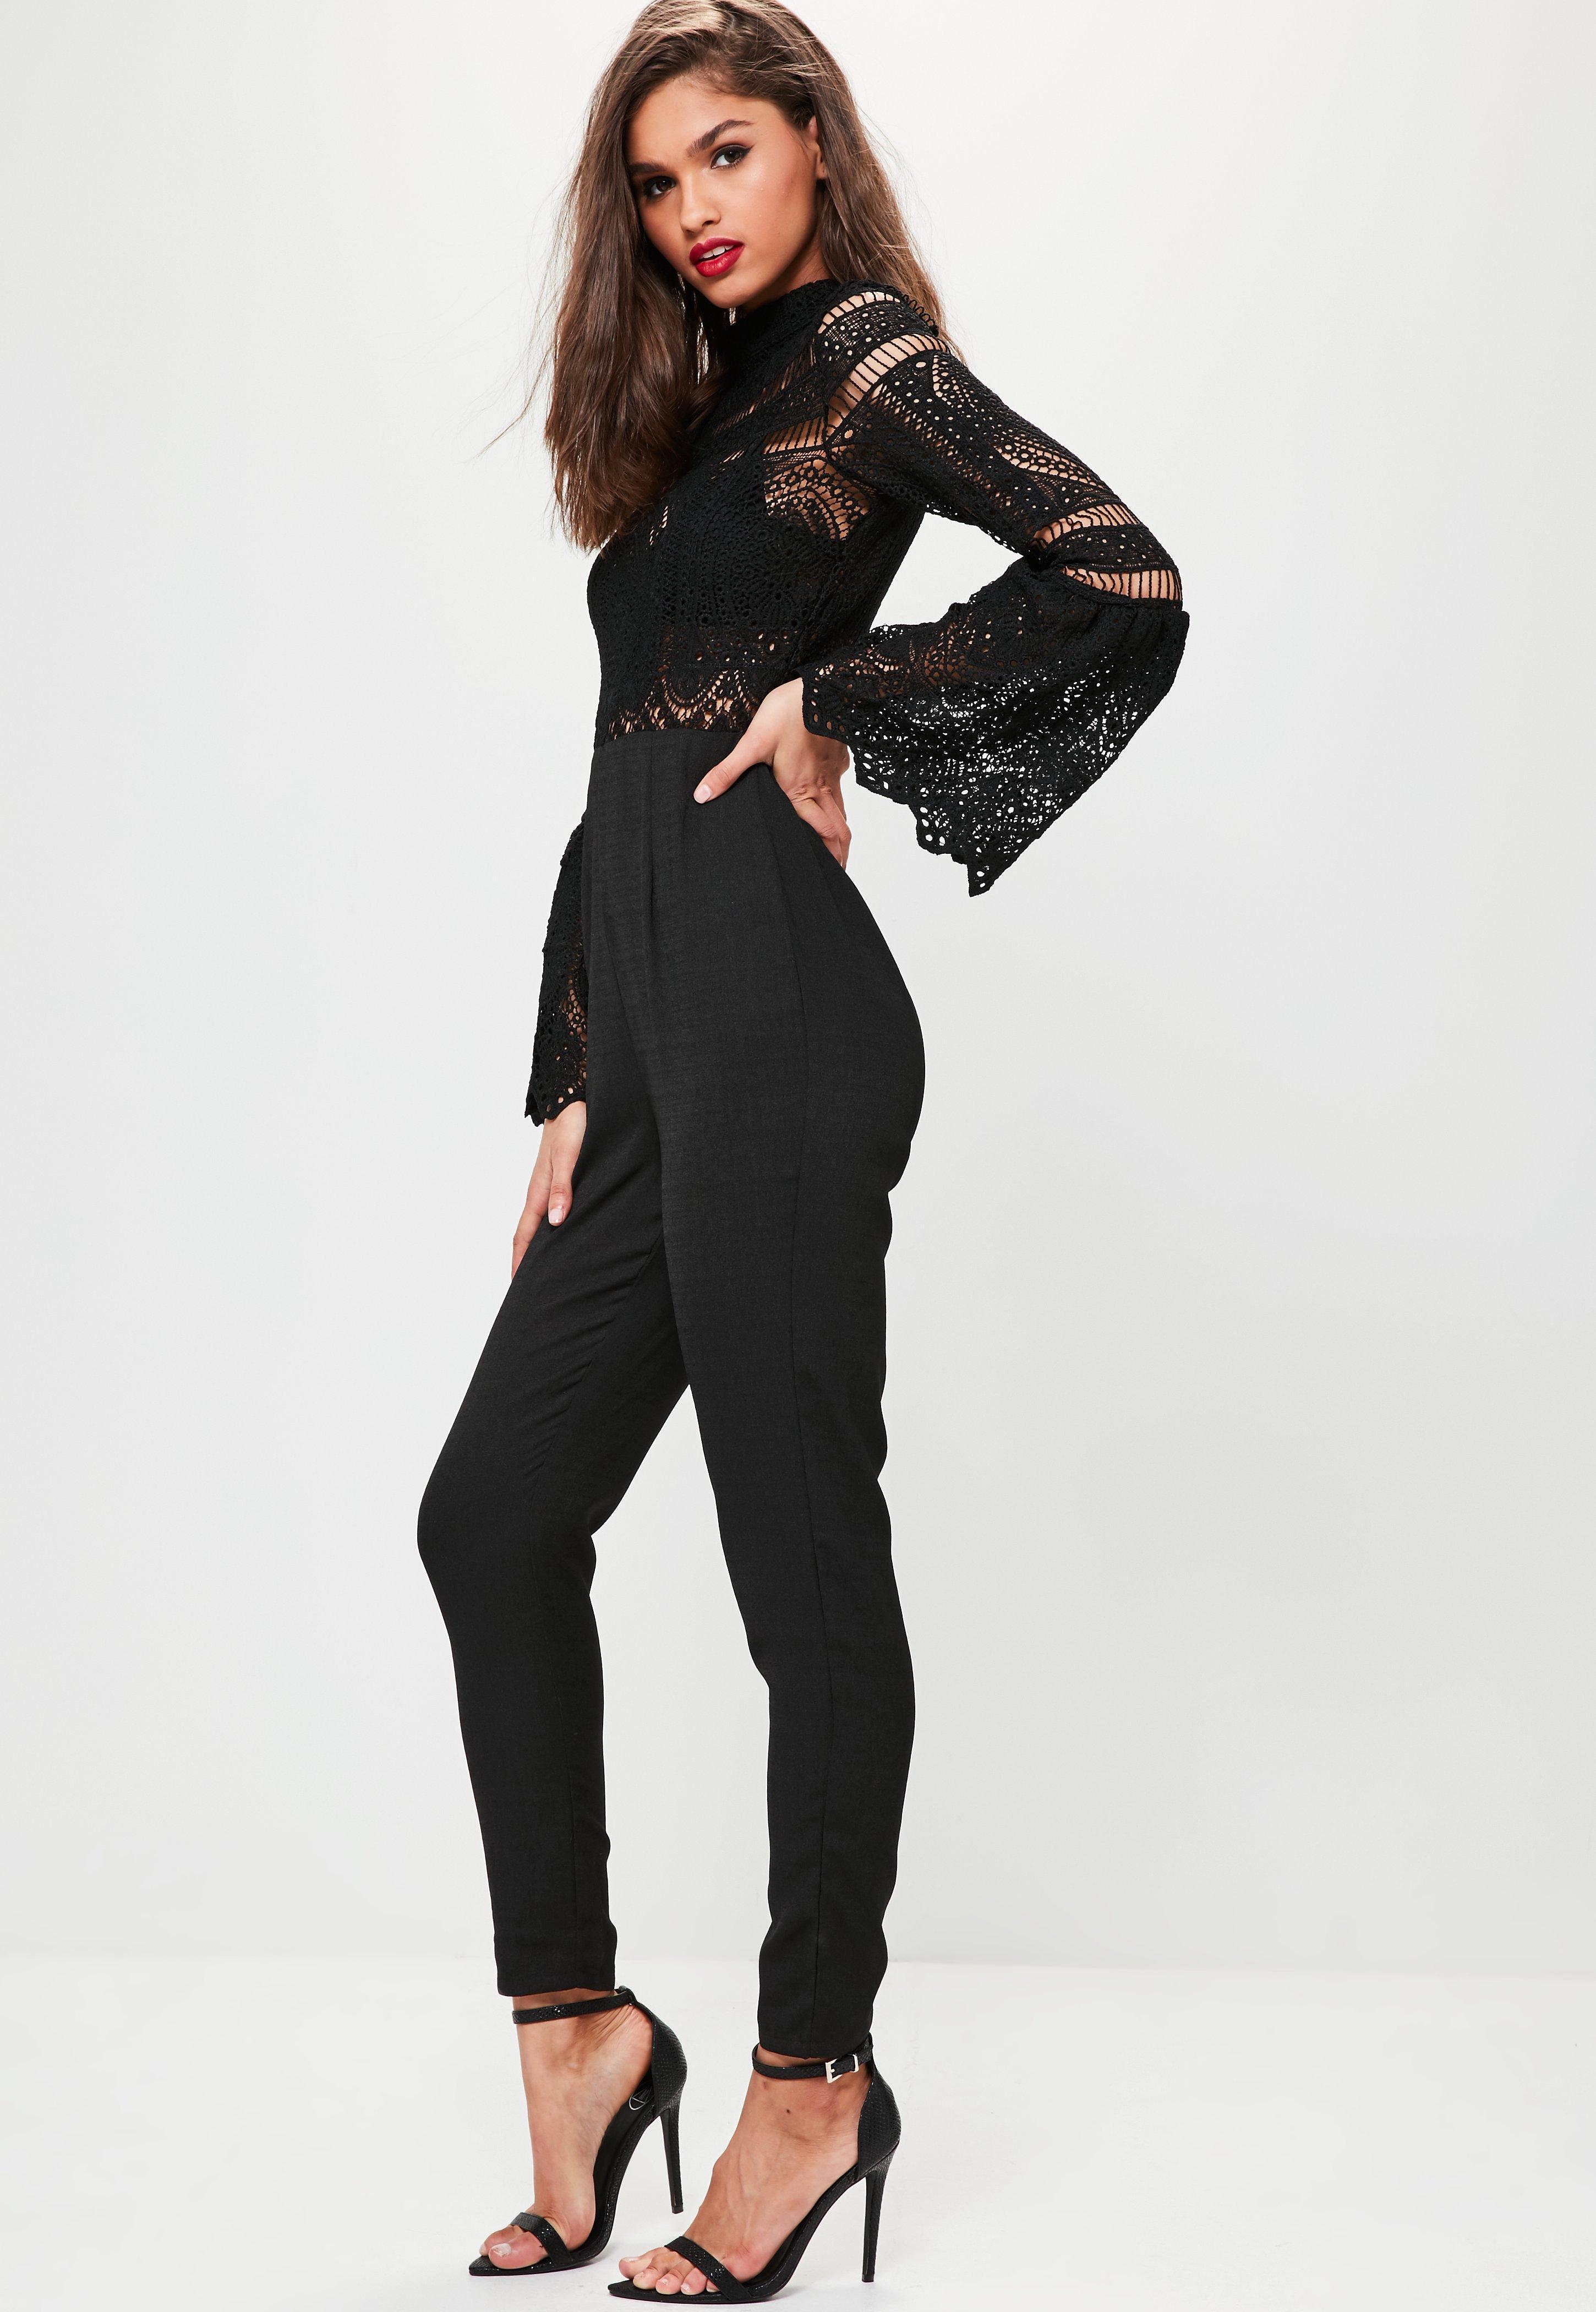 Lyst - Missguided Black Crochet Lace Top Flare Sleeve Jumpsuit in Black